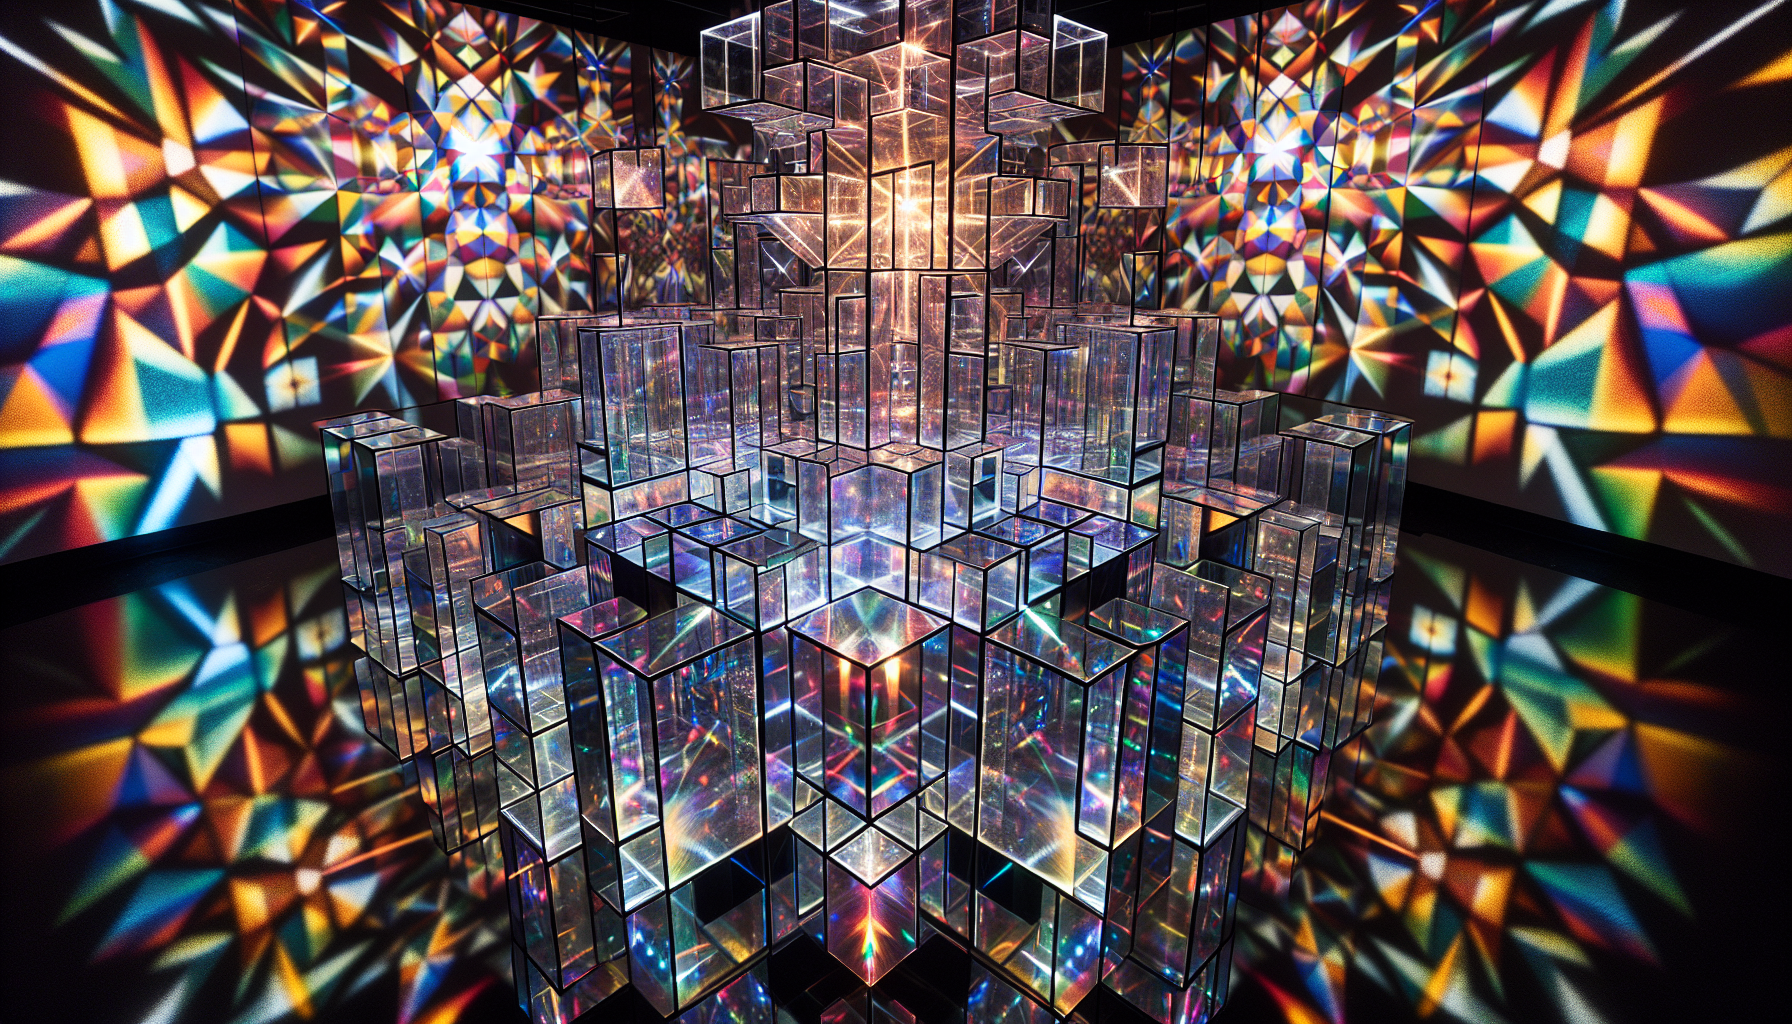 A captivating visual light-based puzzle